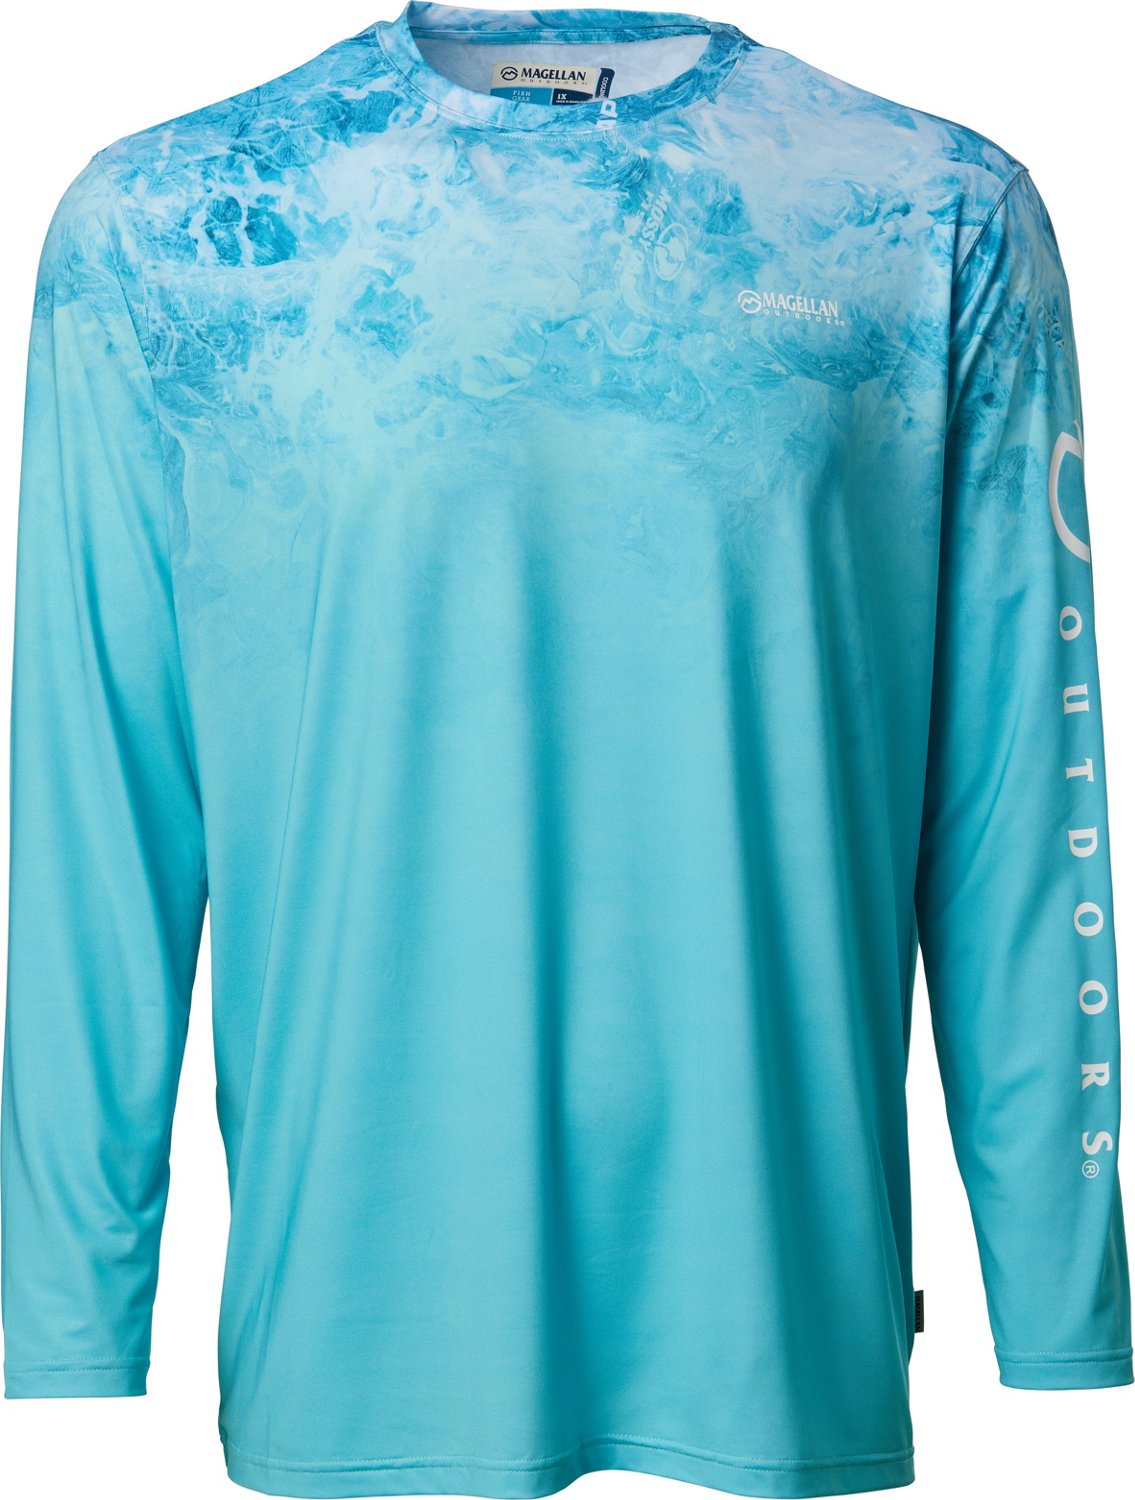 magellan women's long sleeve fishing shirts for Sale,Up To OFF 75%